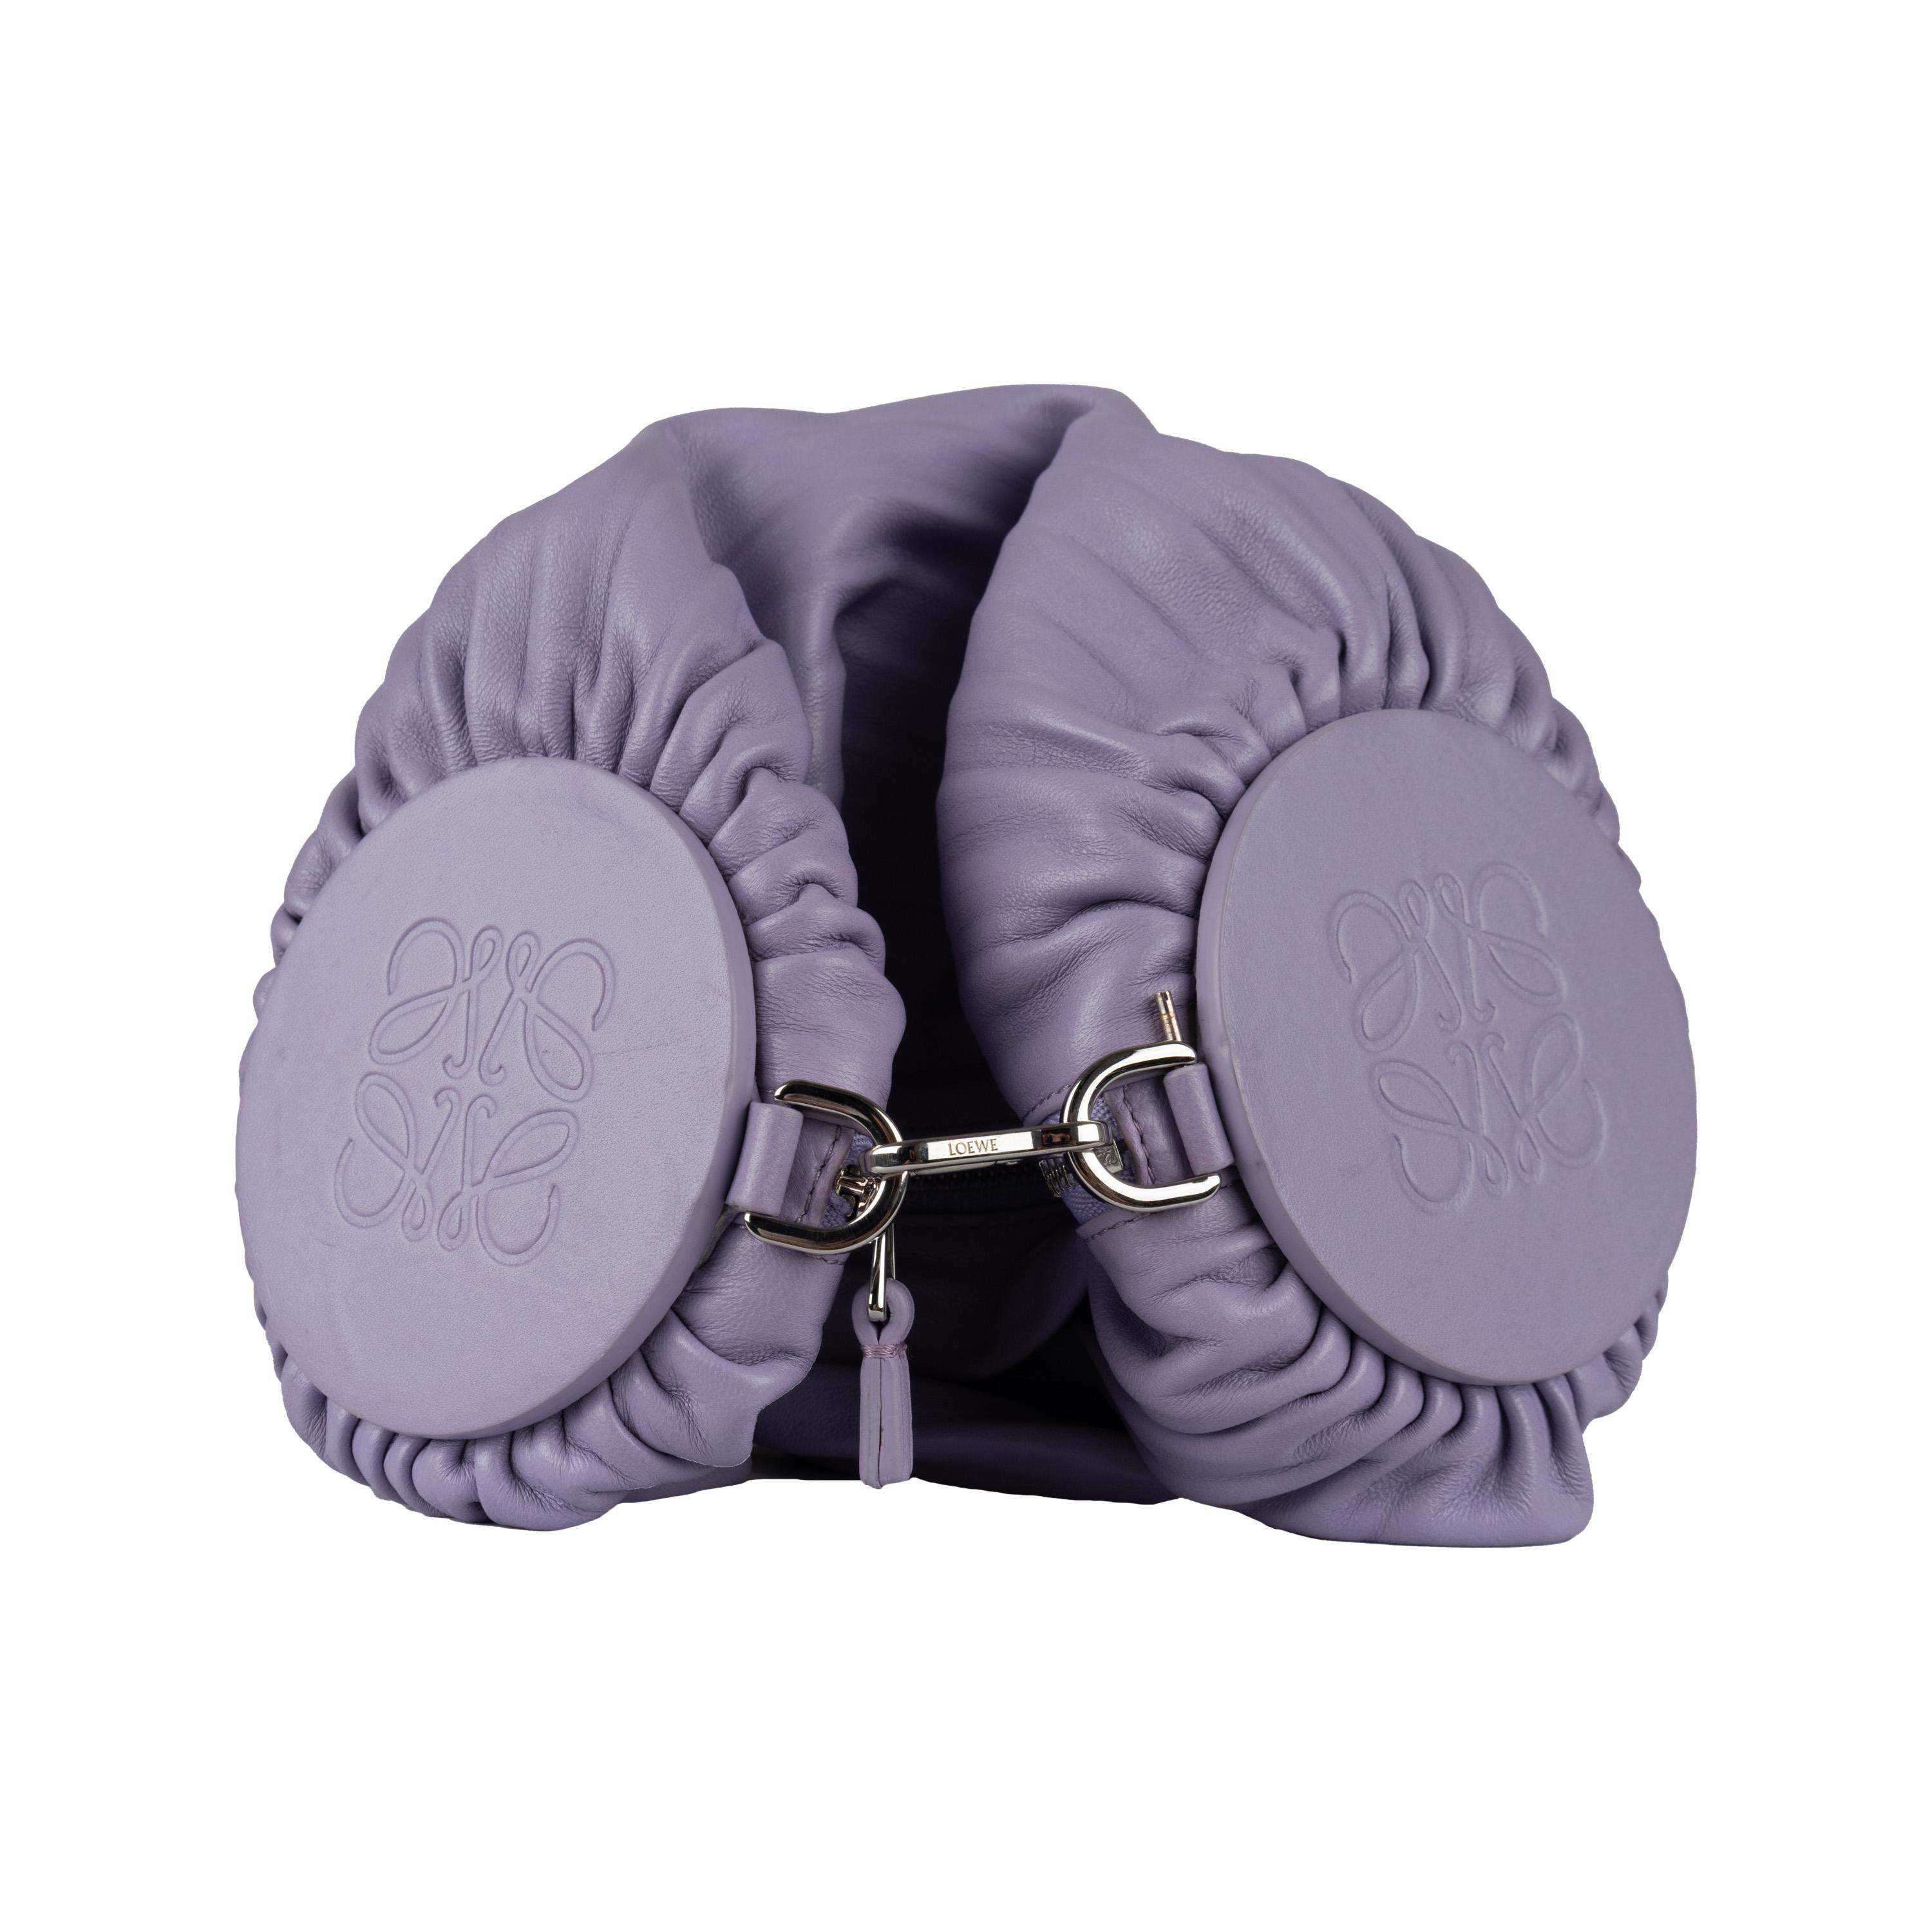 Loewe's Bracelet Pouch Bag is crafted from pleated, nappa leather in lilac color that transforms into an oversized bracelet with the detachable and adjustable strap. The zip closure and tonal pulls provide reliable security, while the engraved